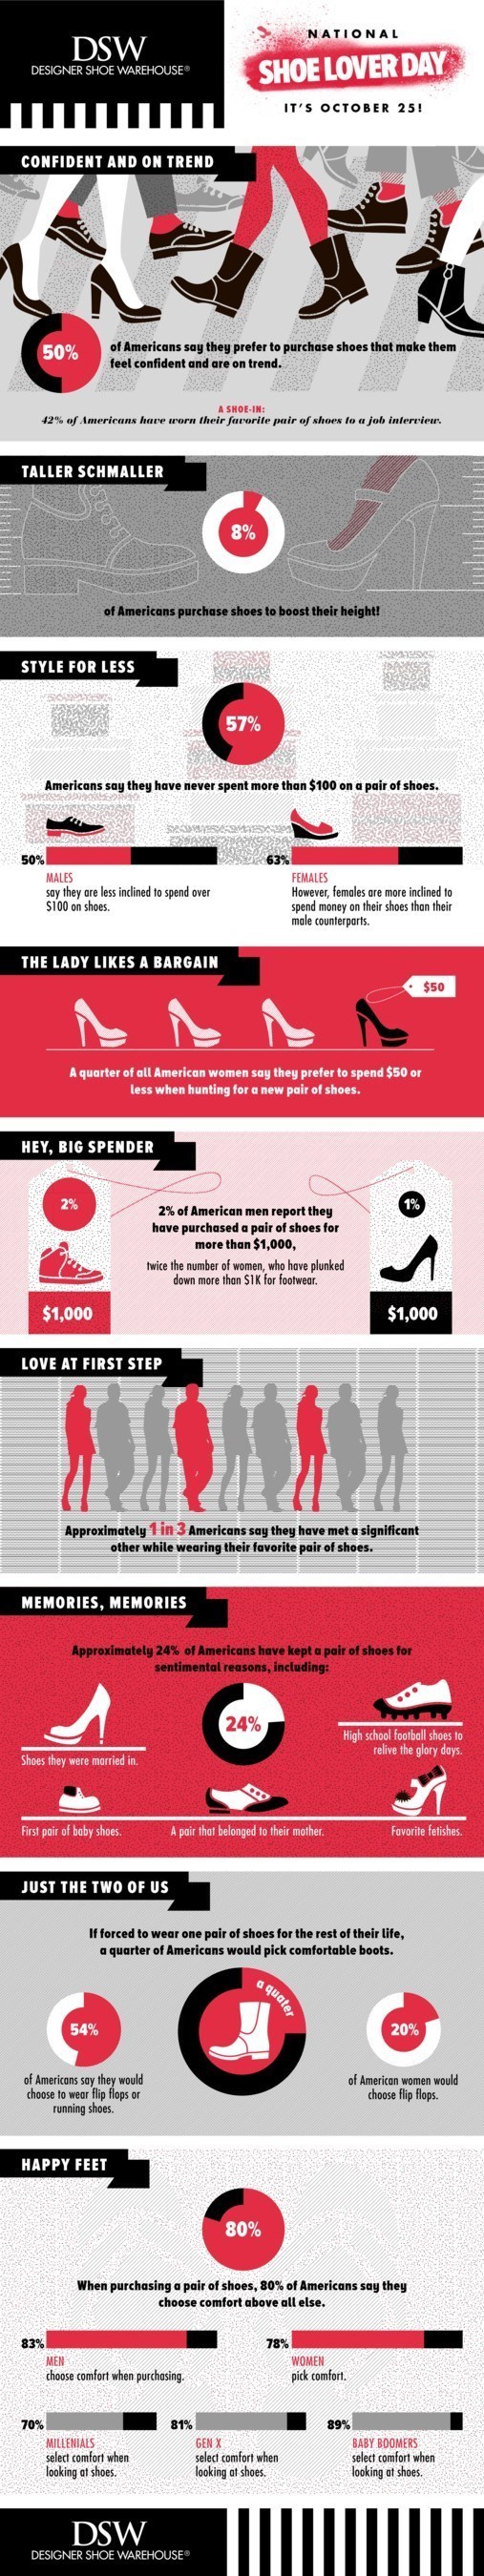 DSW shares results of new national consumer survey celebrating National Shoe Lover Day on October 25.